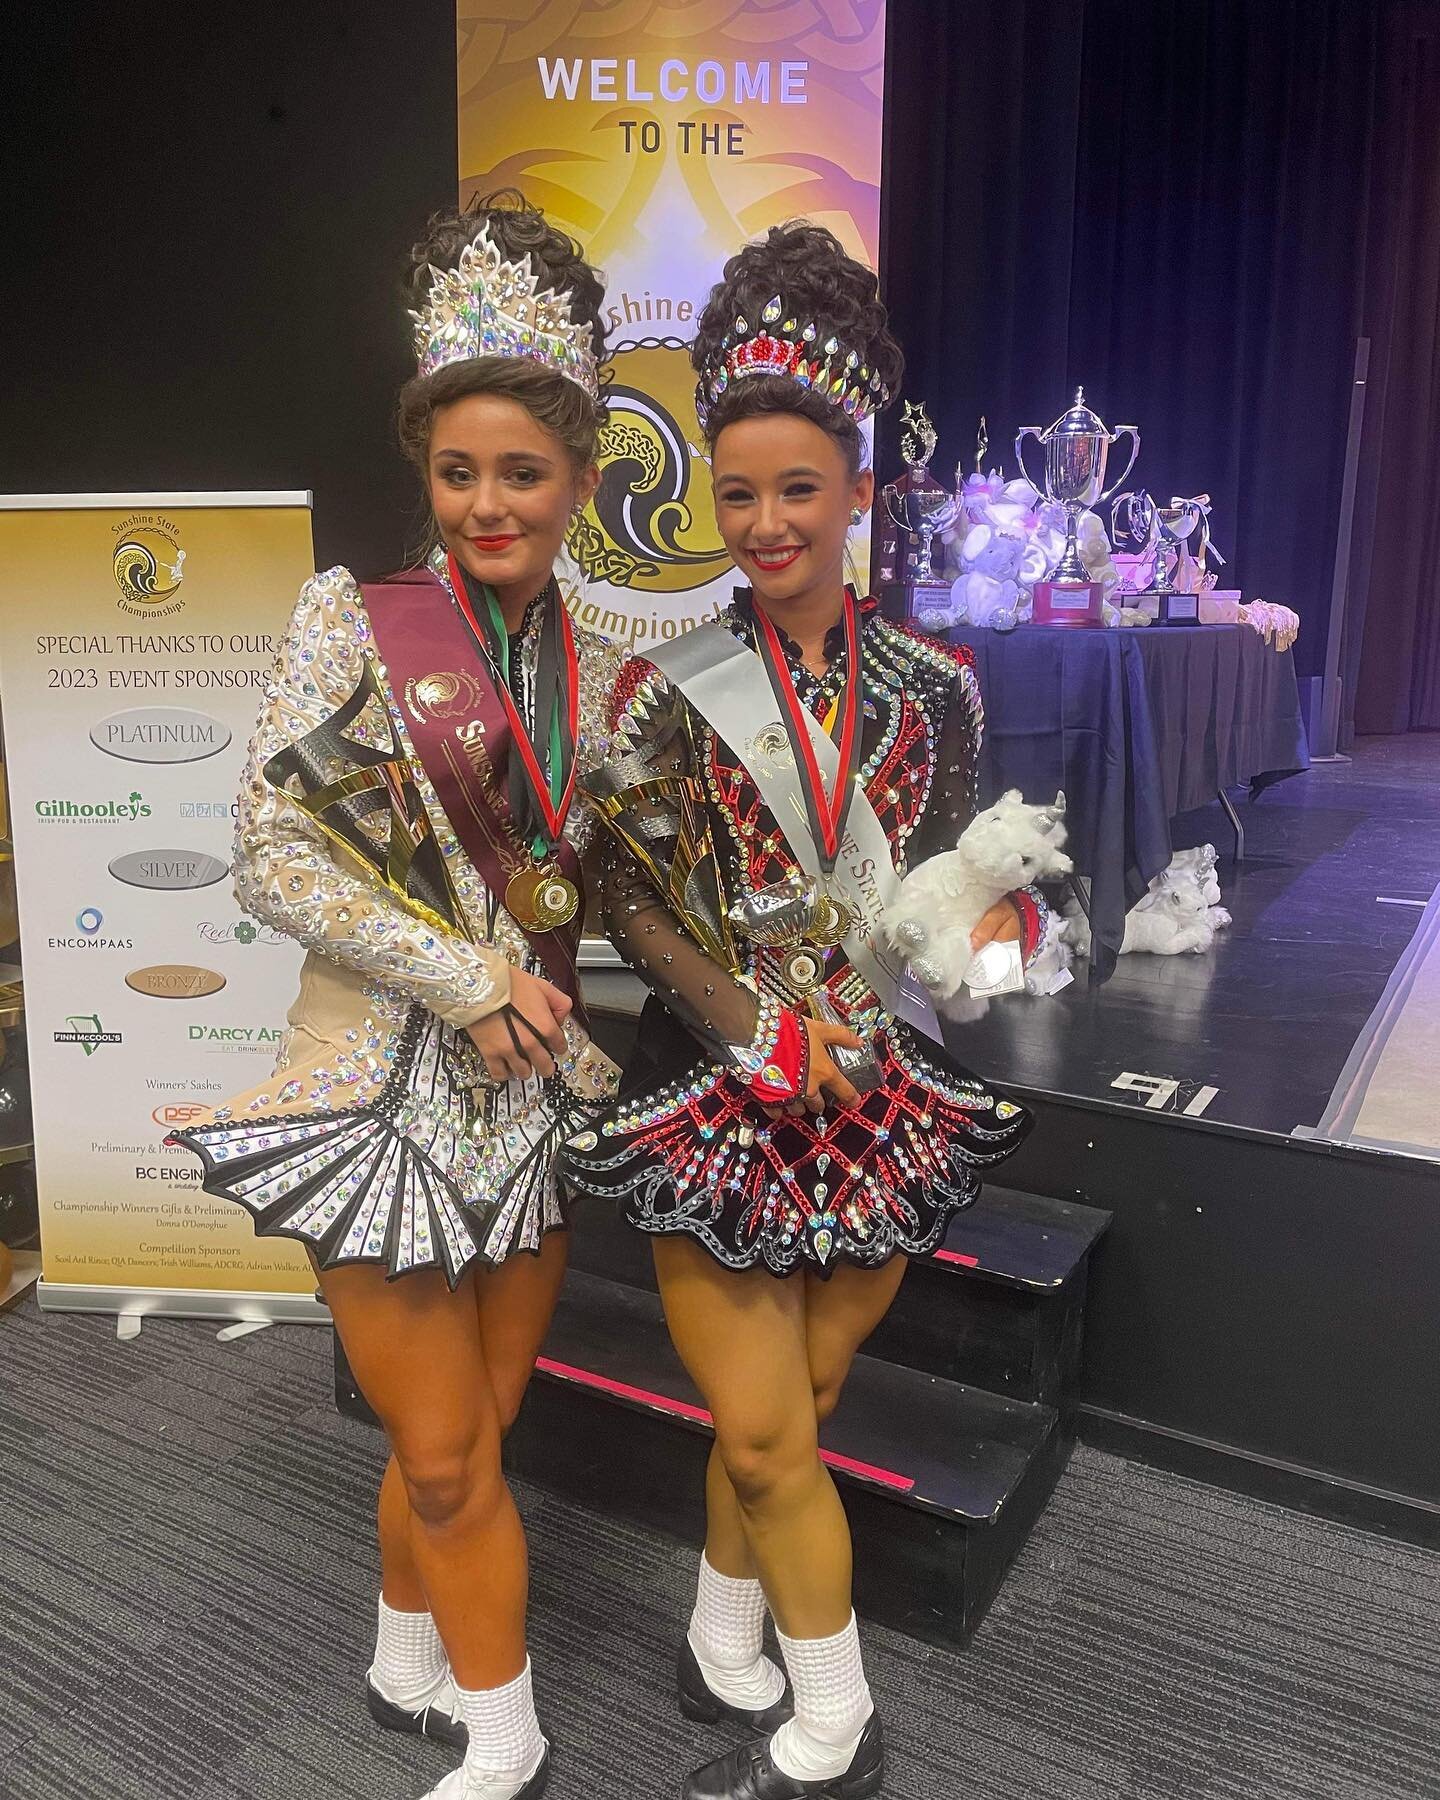 We enjoyed some great success in the Open Championships with several top 5 podium positions! Congratulations to all dancers! 🤩🤩🤩

🥈 2nd Kerry Stanton, 13 &amp; 14 Years
🥈 2nd Sahara Ashby, 17 &amp; 18 Years
🥉 3rd Holly Egan, 17 &amp; 18 Years
?